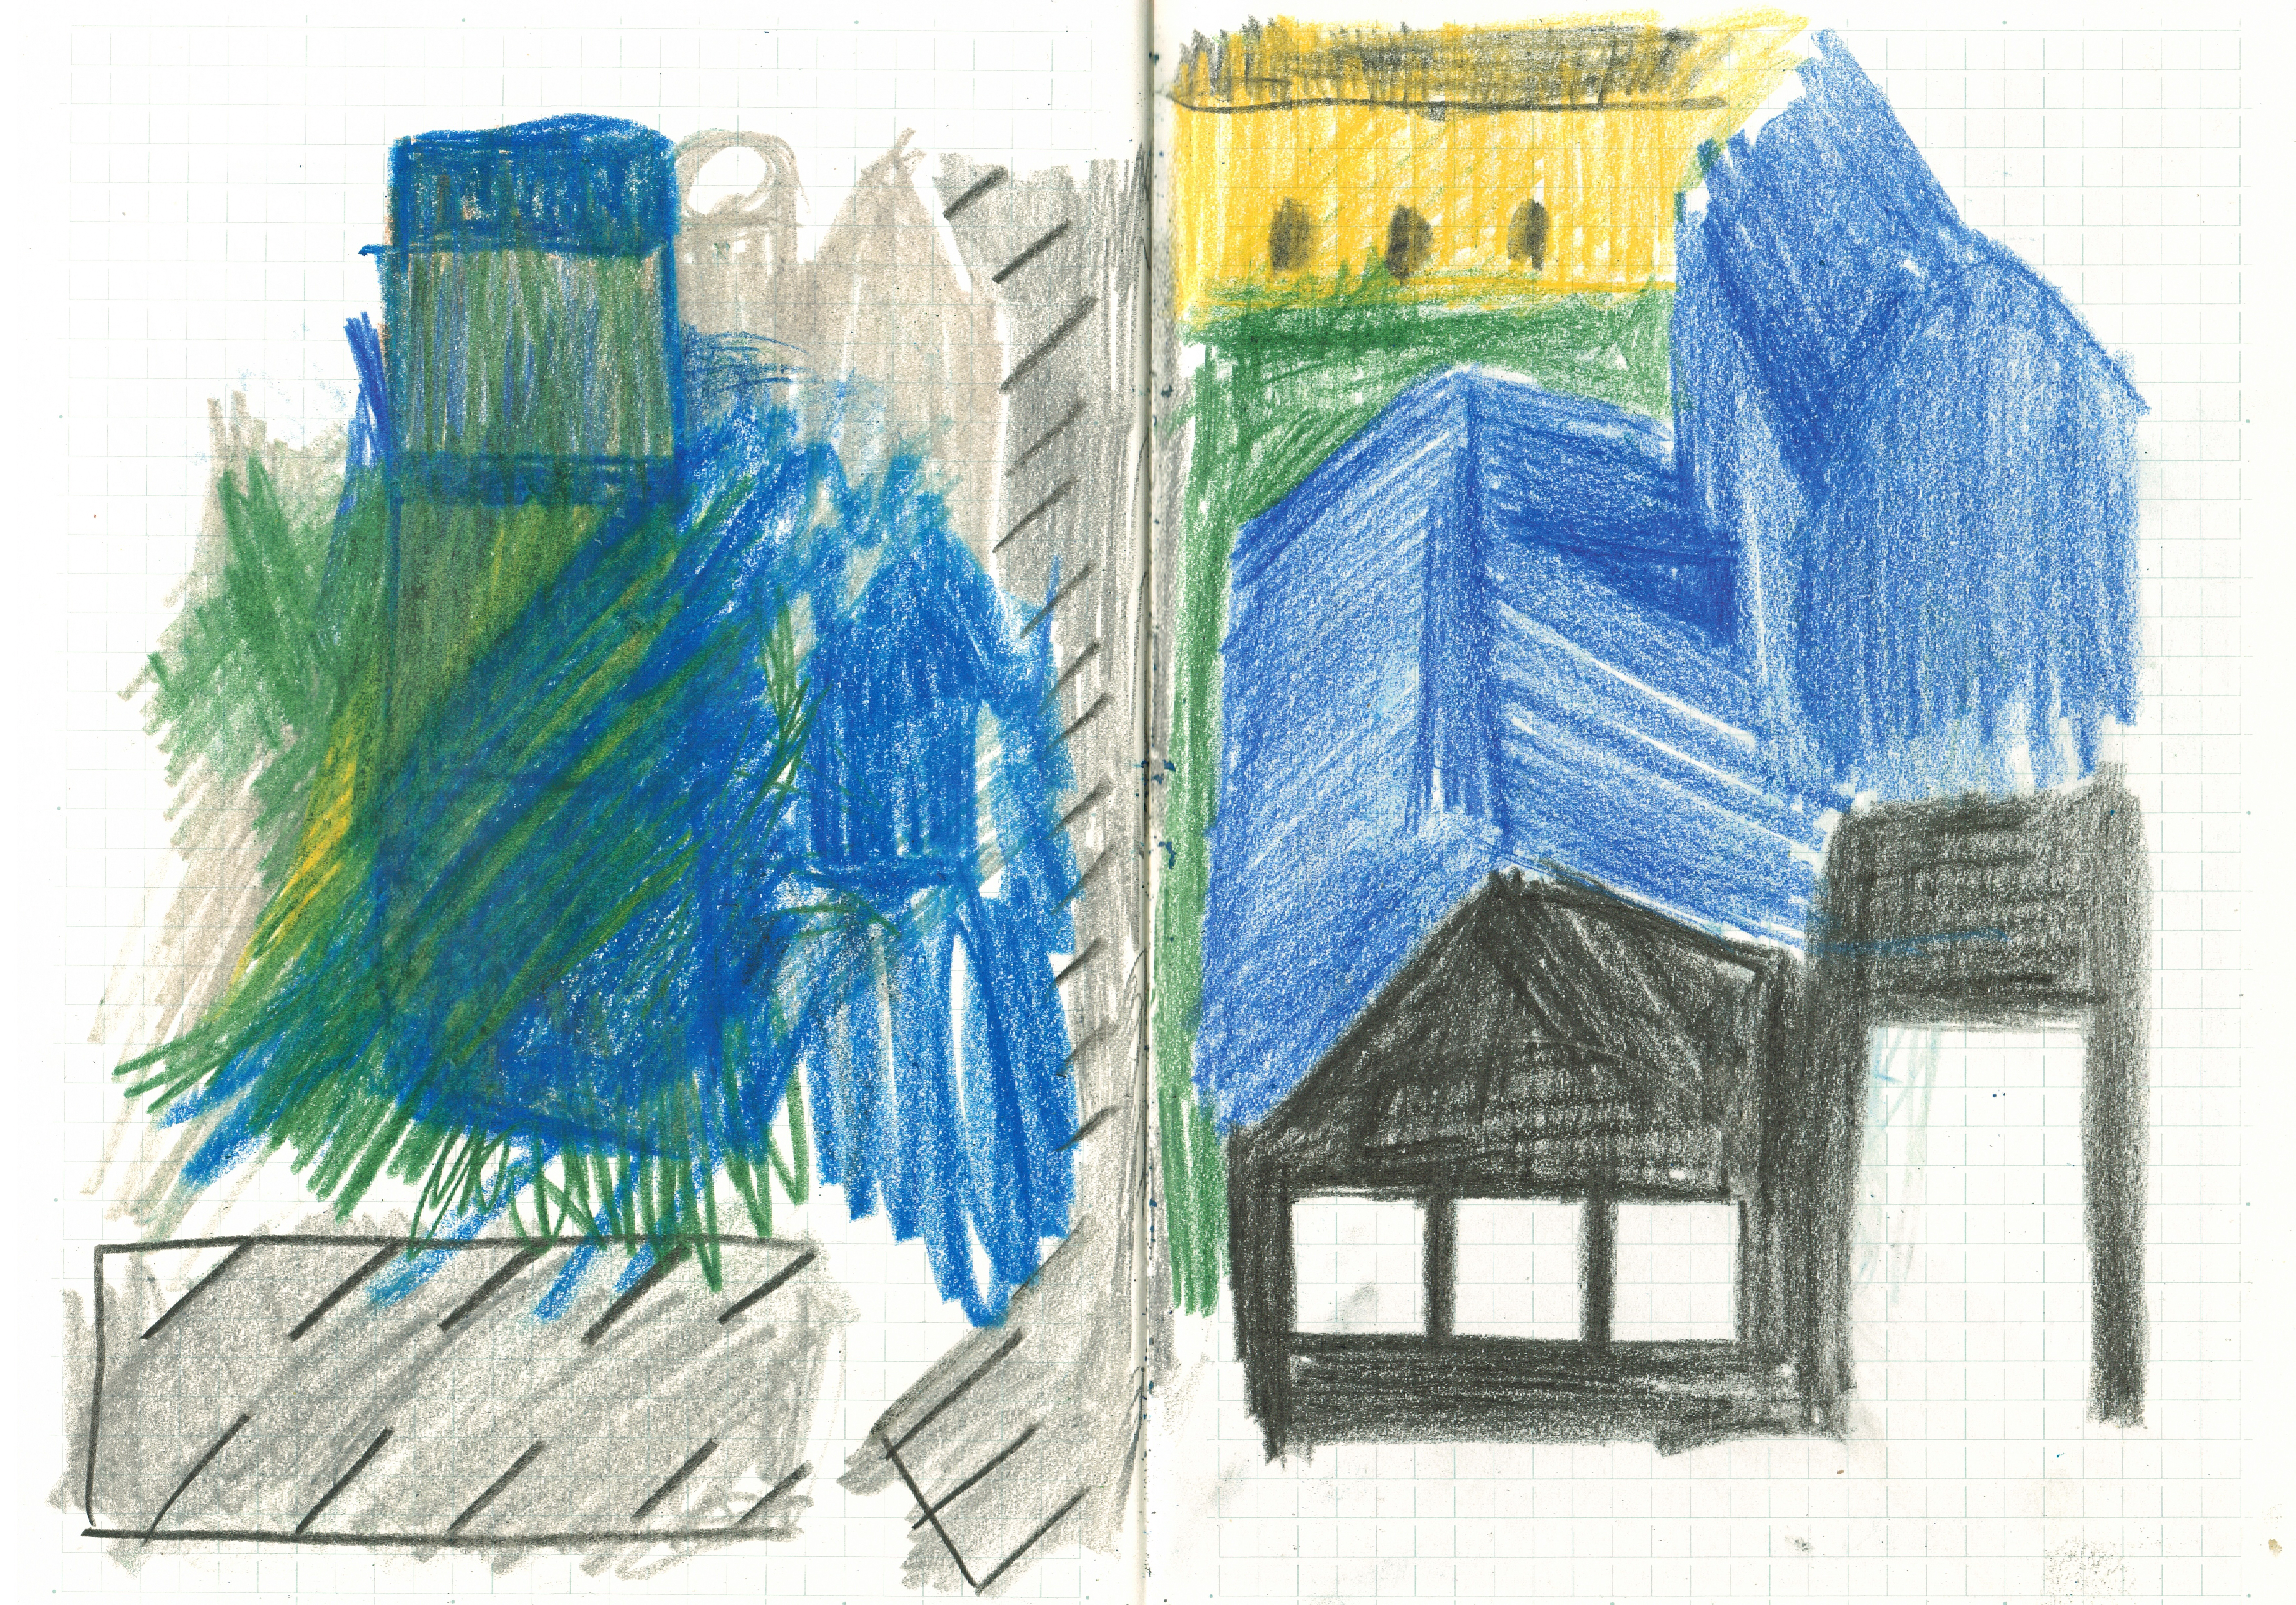 drawing in colored pencil of a house in black with blue roof and a yellow one in the back, and on the left a tower and greenery with a parking lot in grey